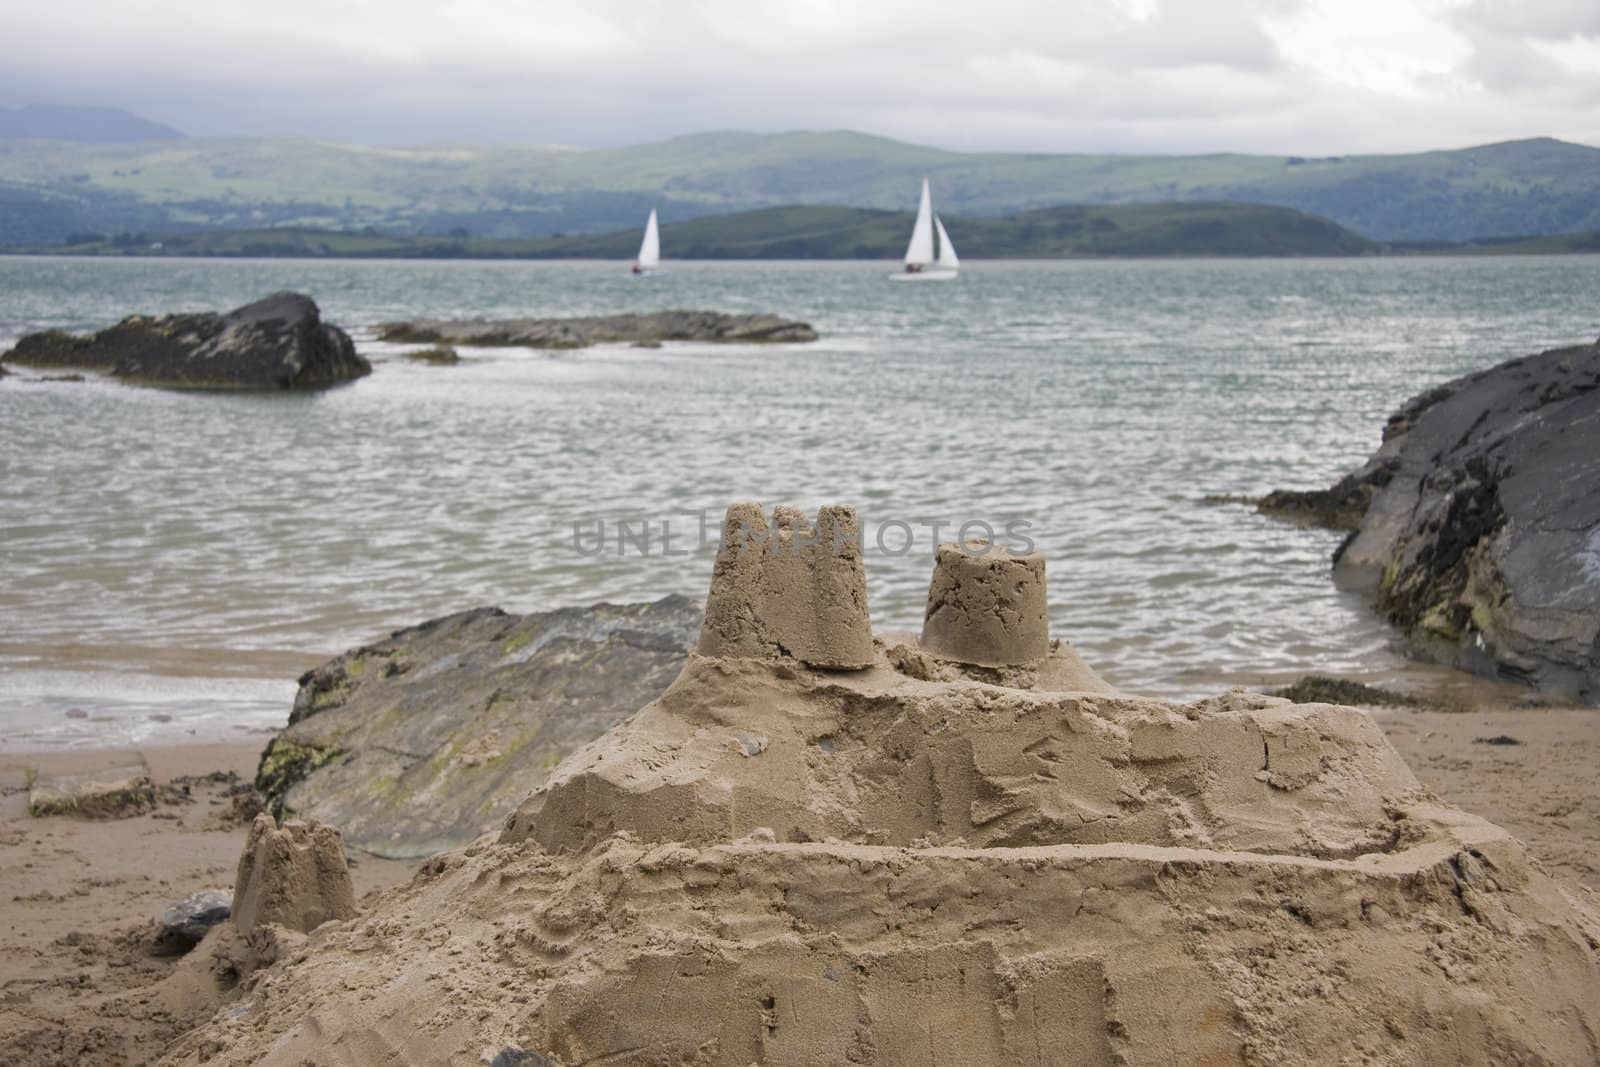 Sandcastle on the beach,with sea, yachts and mountains in the background.